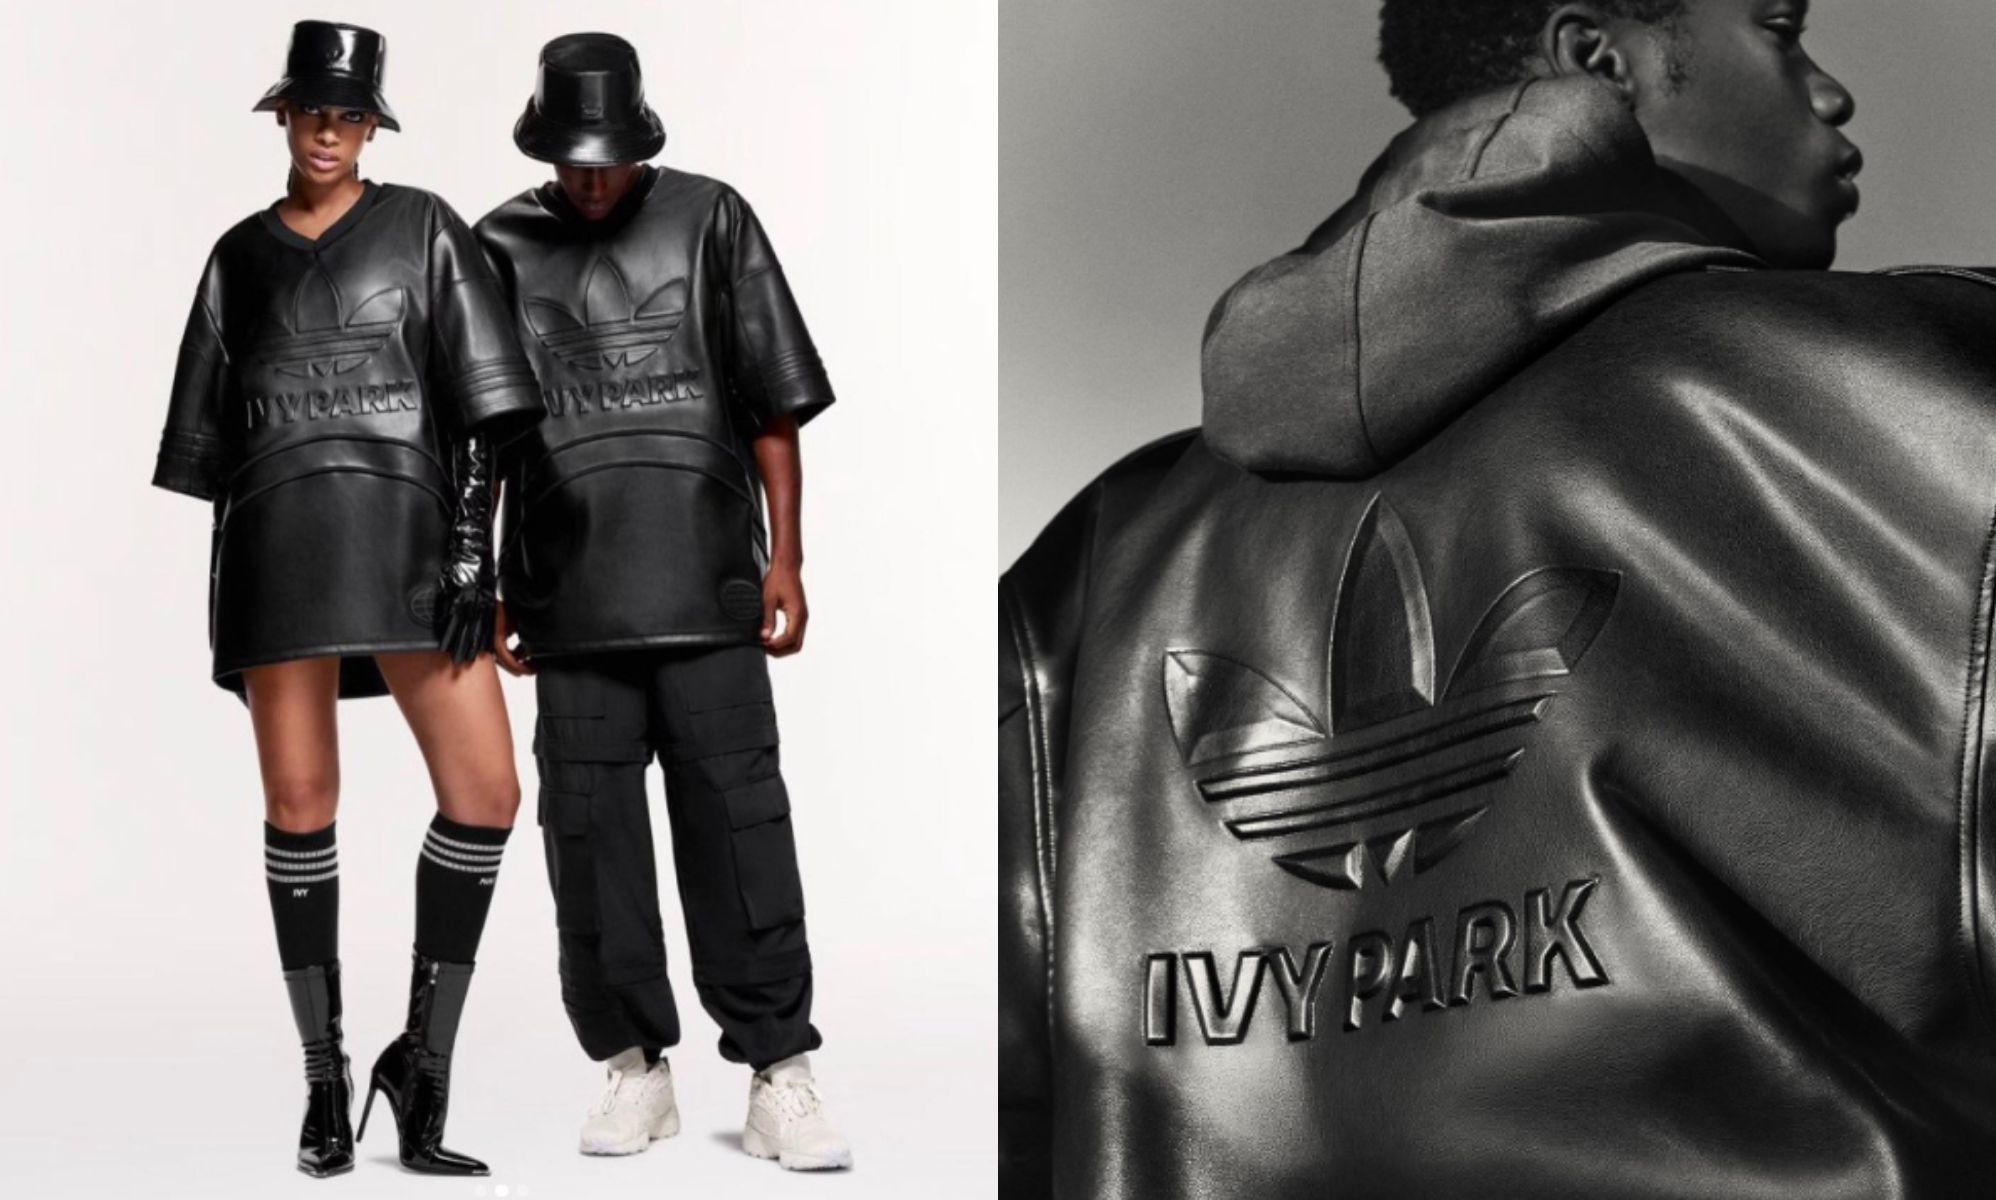 Beyoncé's Ivy Park Announces New Collection Just in Time for